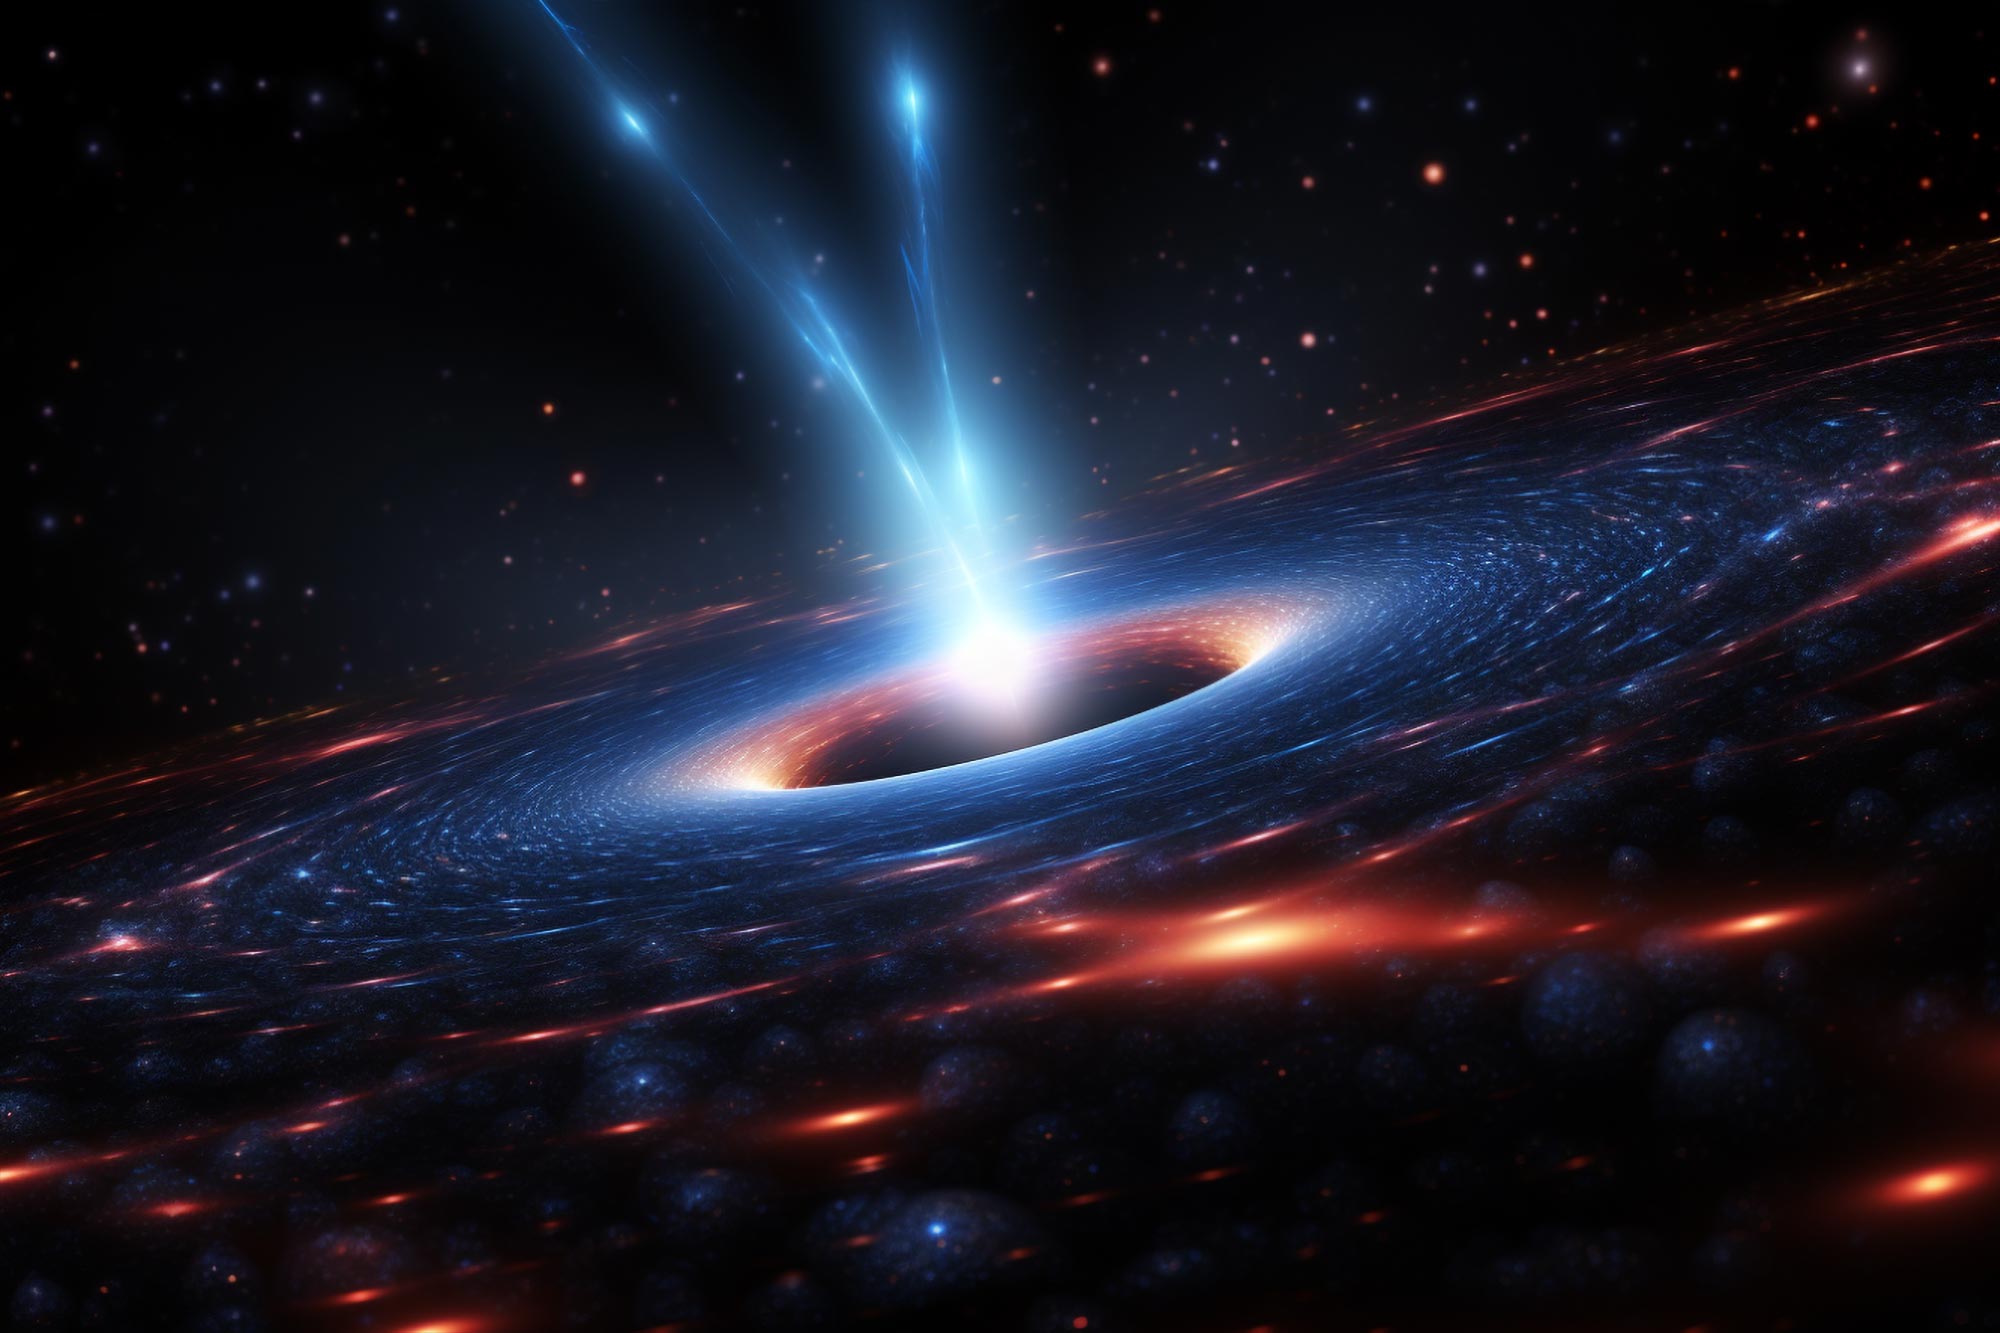 What happened to all supermassive black holes?  Astronomers were surprised by Webb’s data